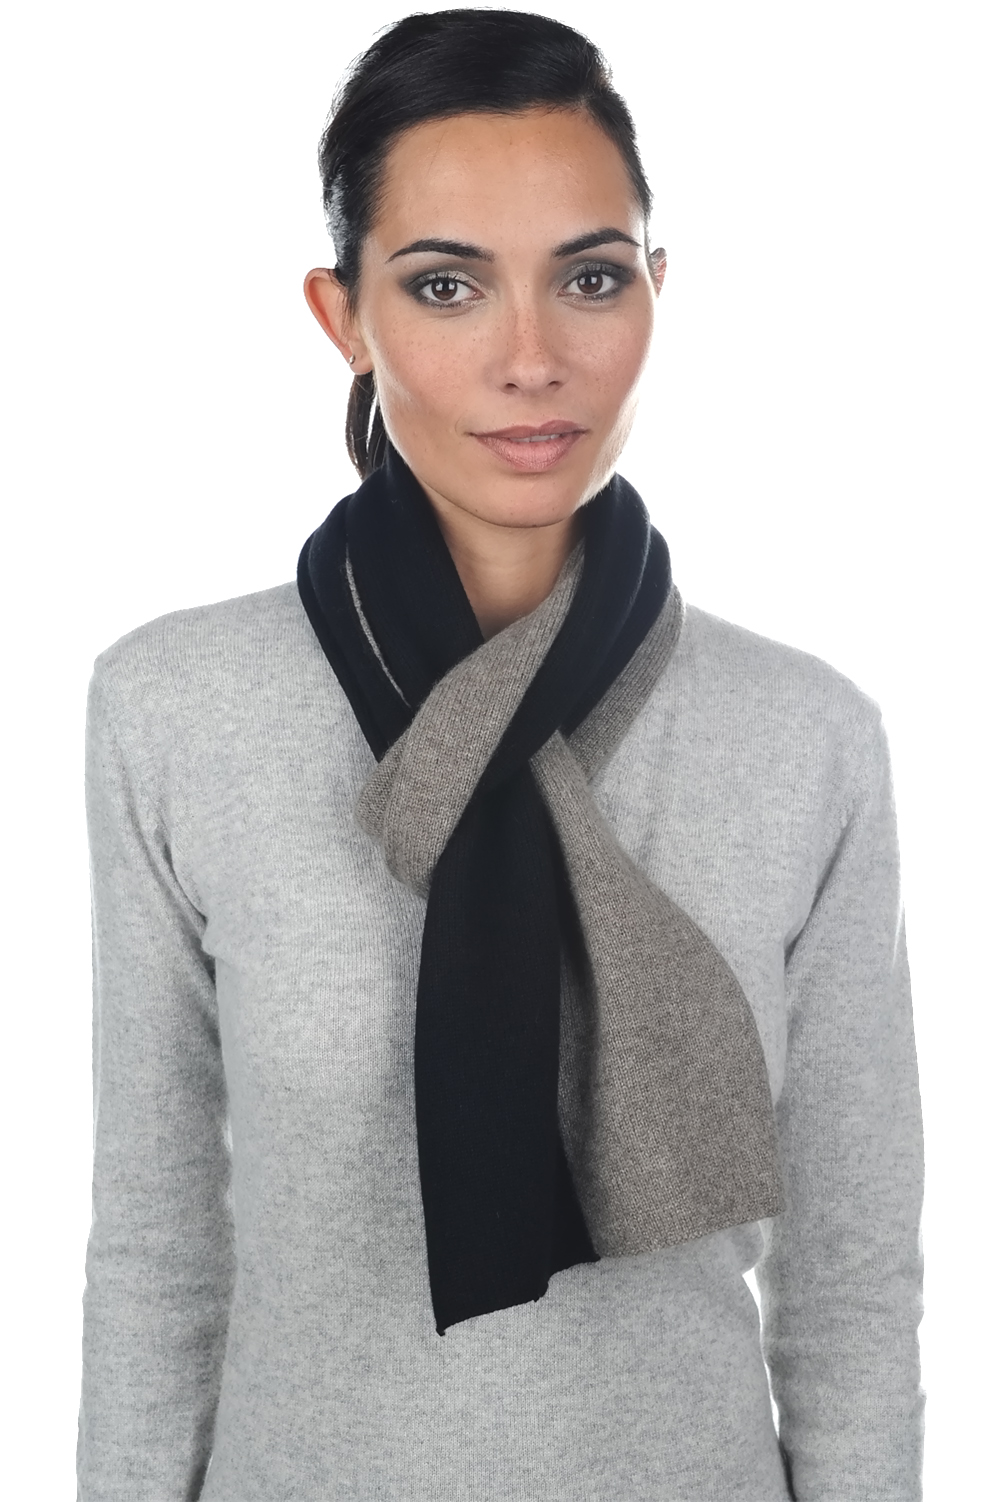 Cashmere & Yak accessories scarves  mufflers luvo black natural 164 x 26 cm